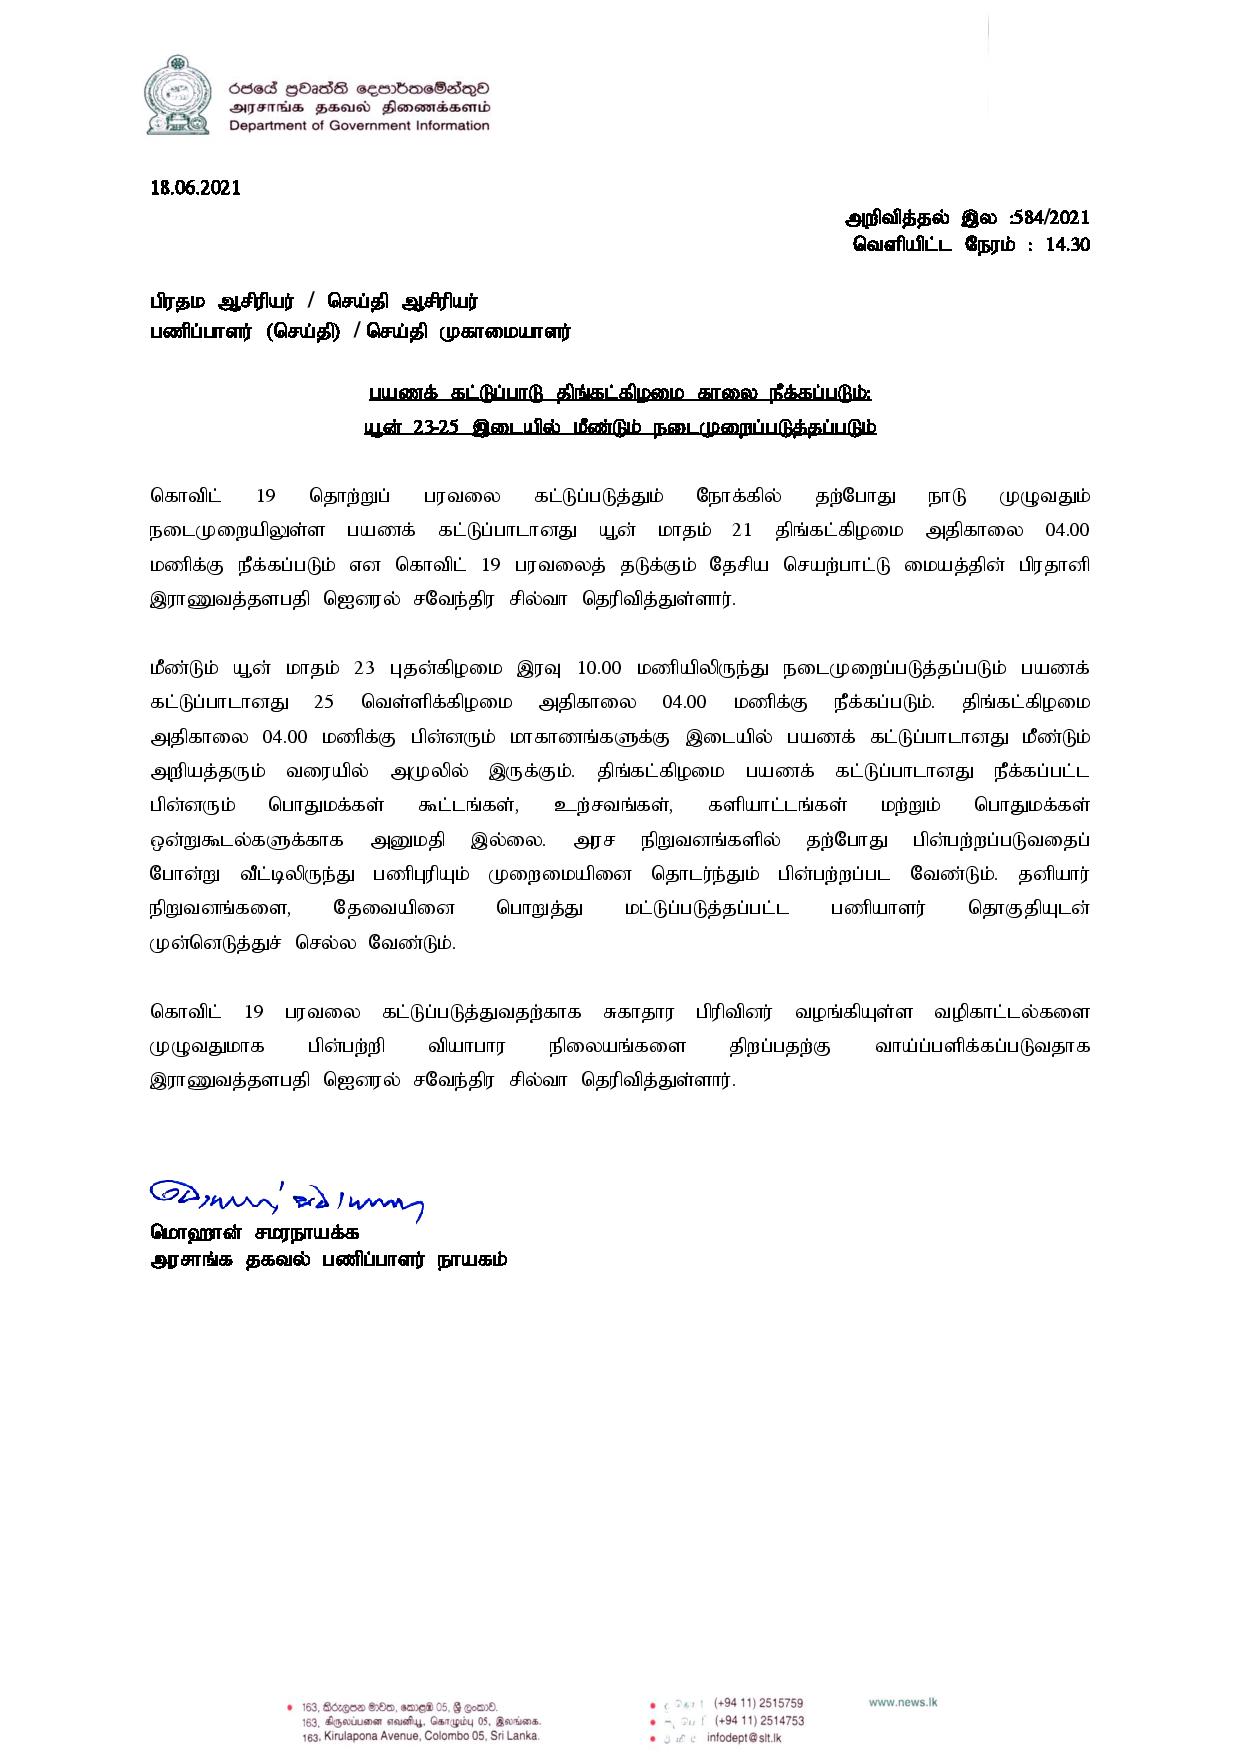 Press Release 584 Tamil page 001